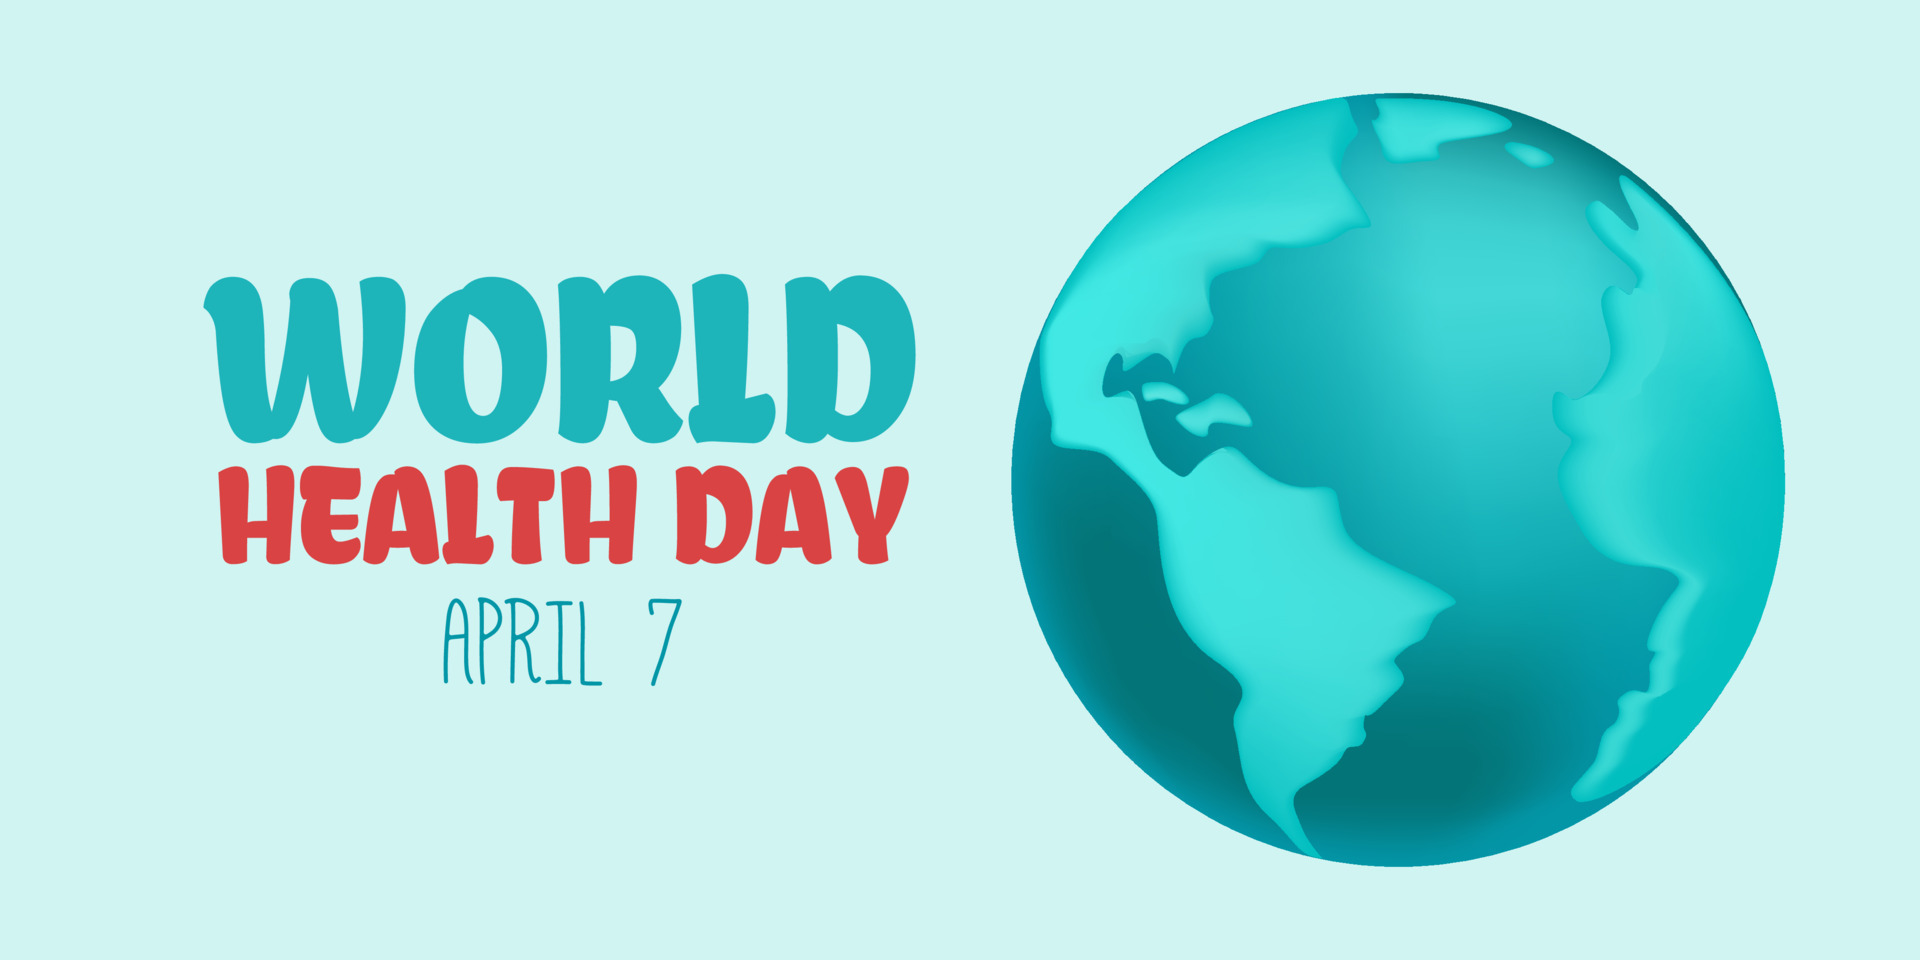 World Health Day is a global health awareness day celebrated every year